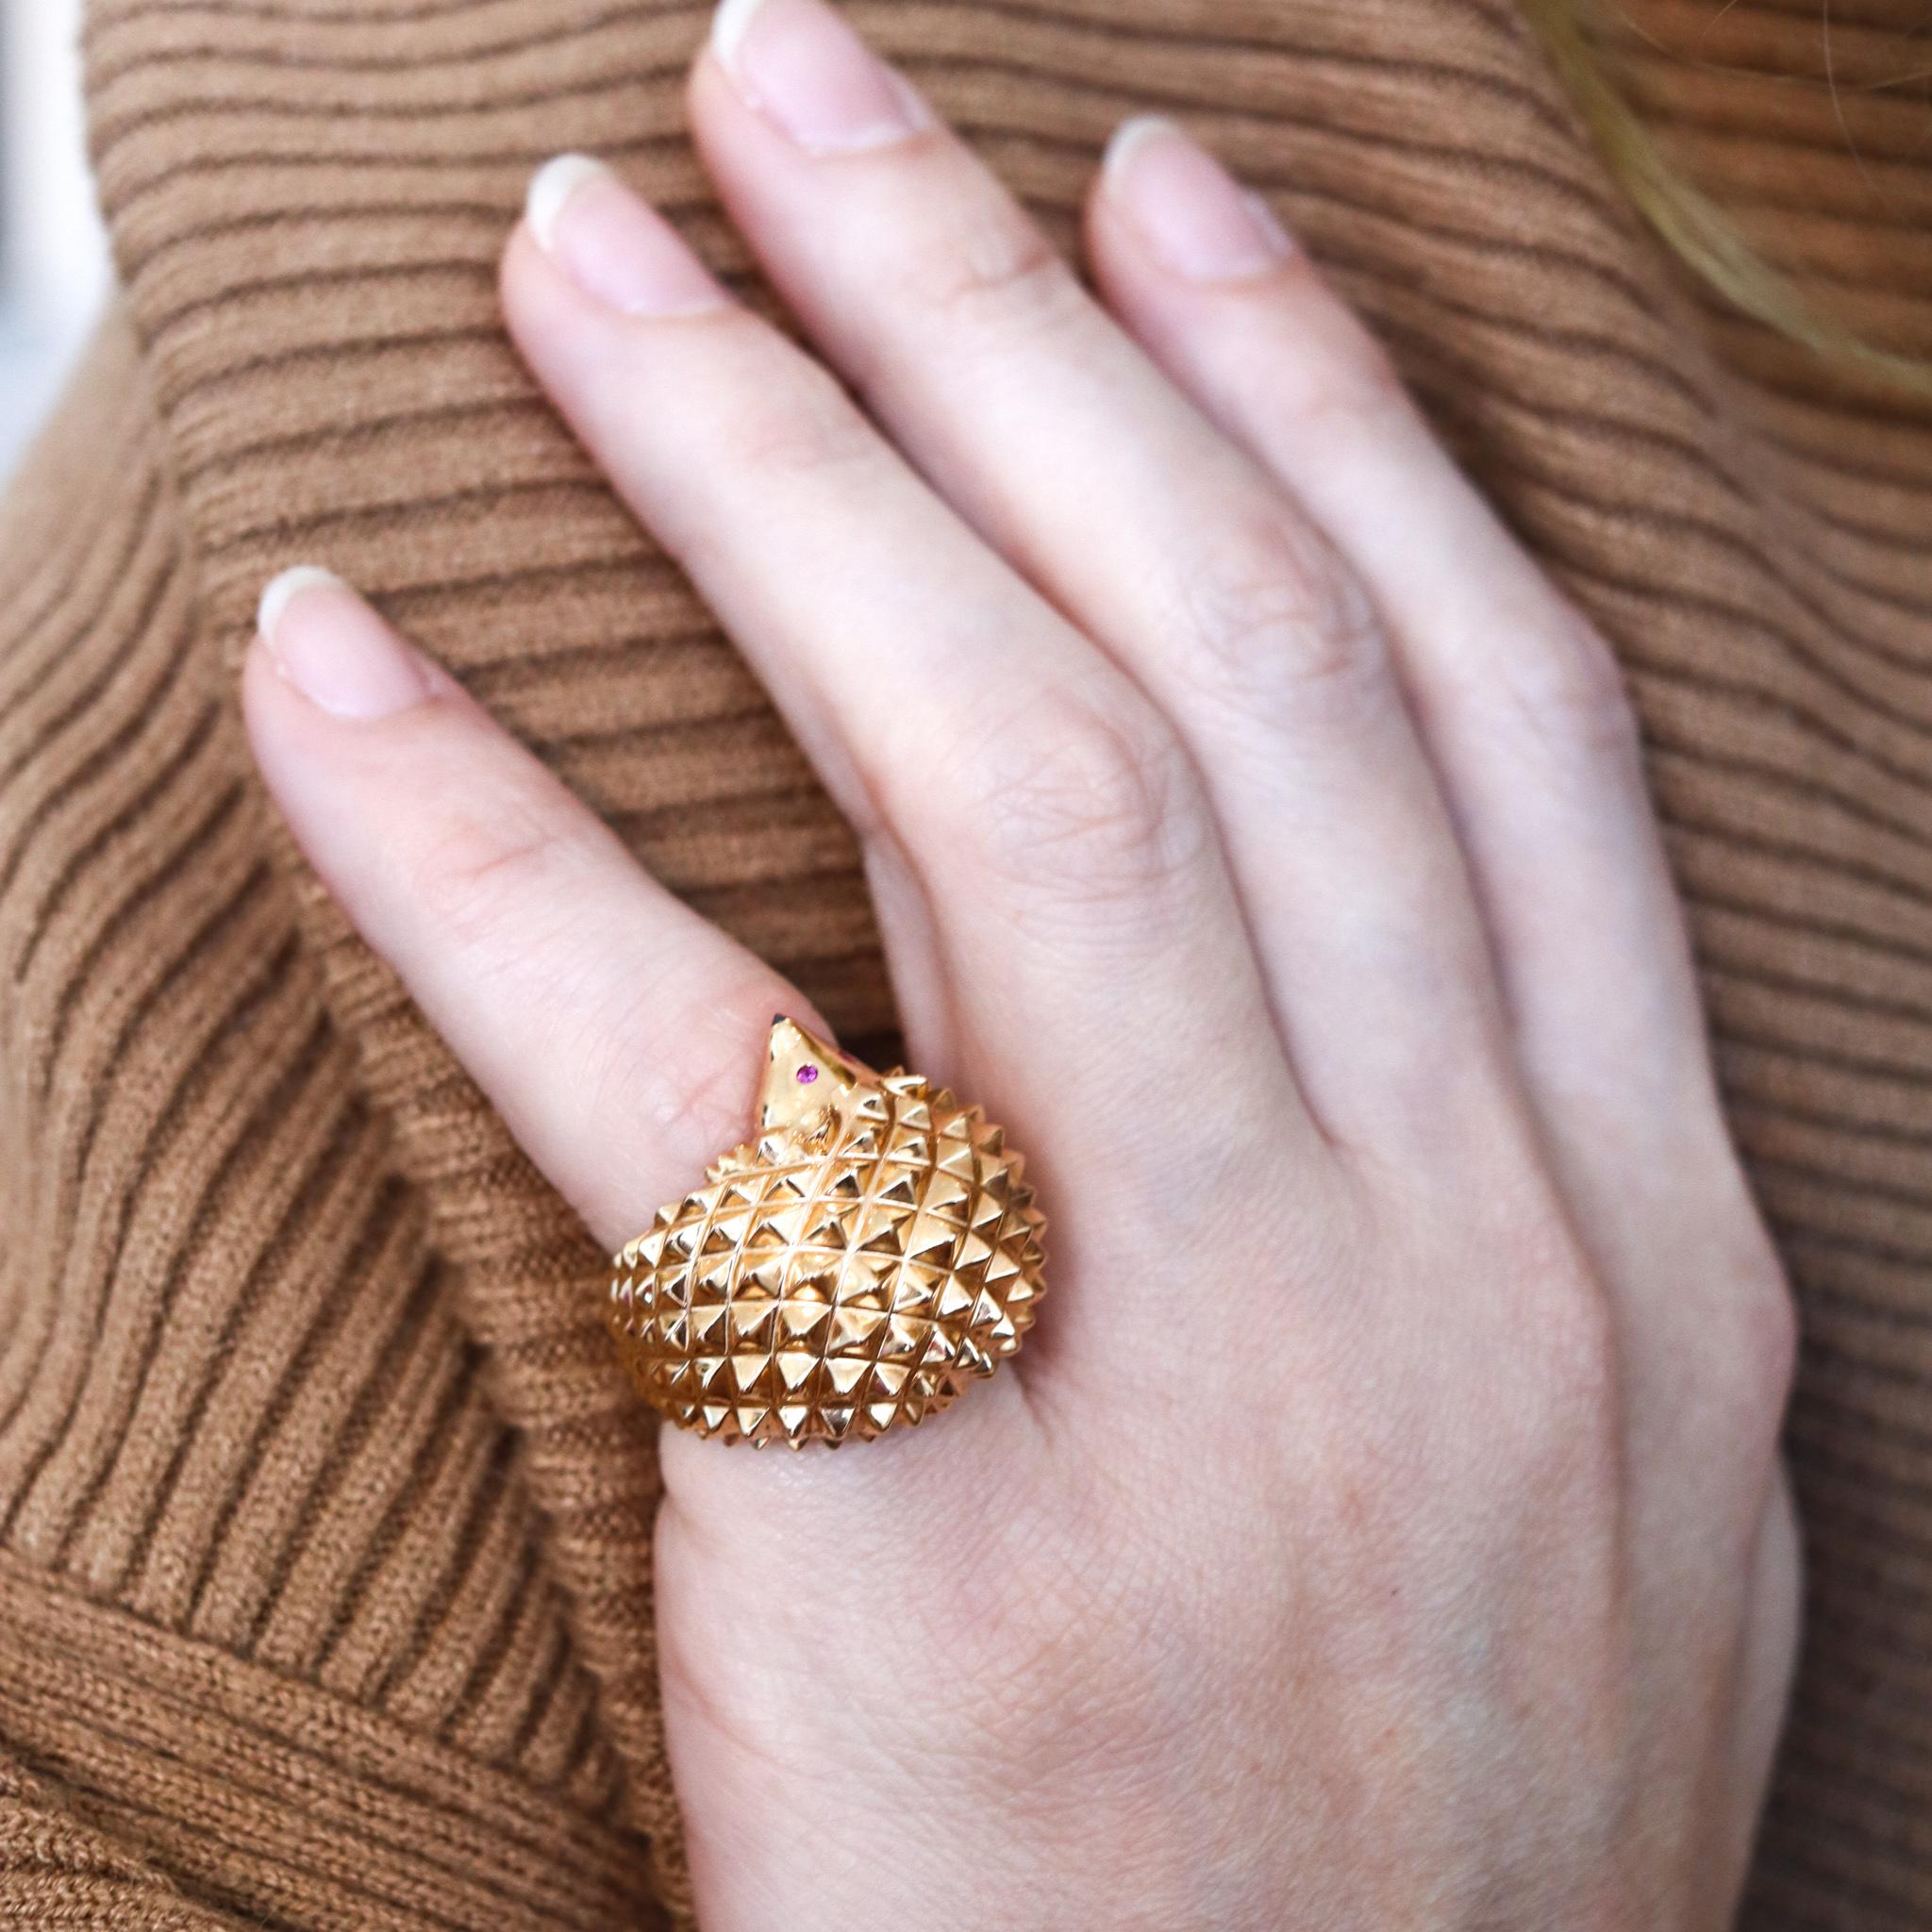 Brilliant Cut Boucheron Paris Rare Textured Porcupine Ring In 18Kt Yellow Gold With Two Rubies